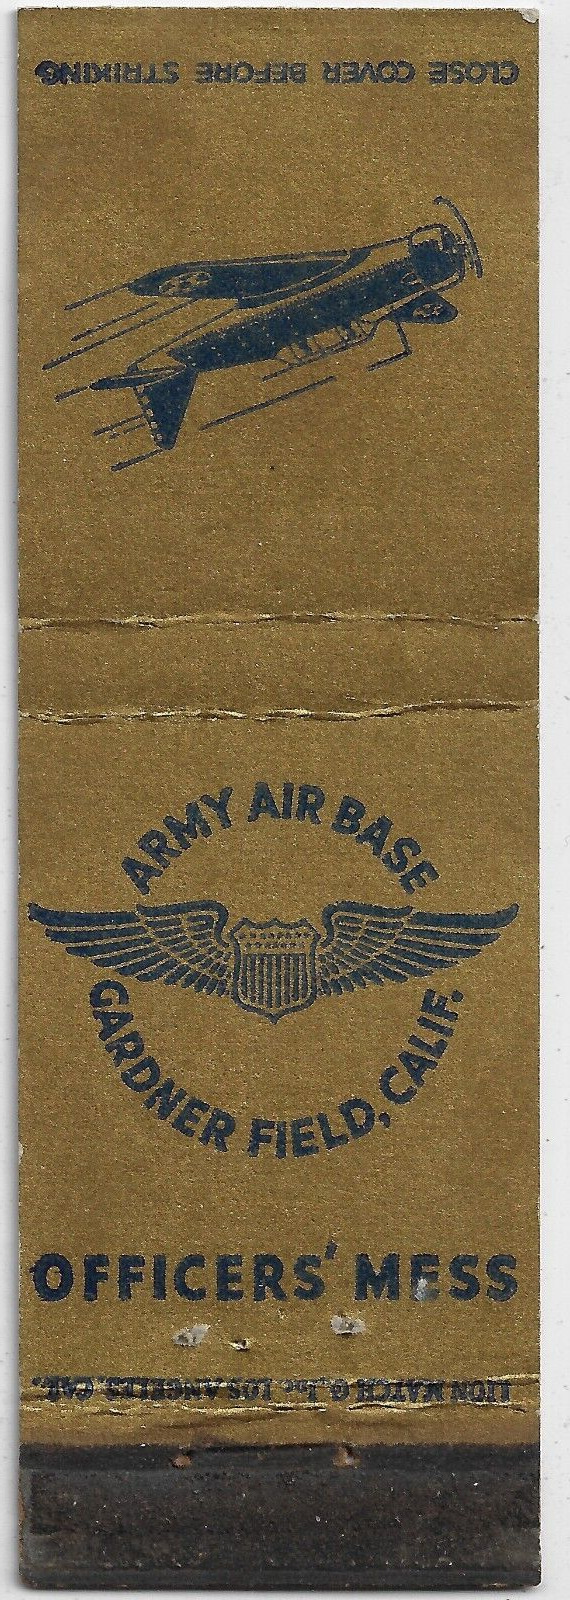 Army Air Base Gardner Field Calif. WWII Officers' Mess FS Empty Matchbook Cover